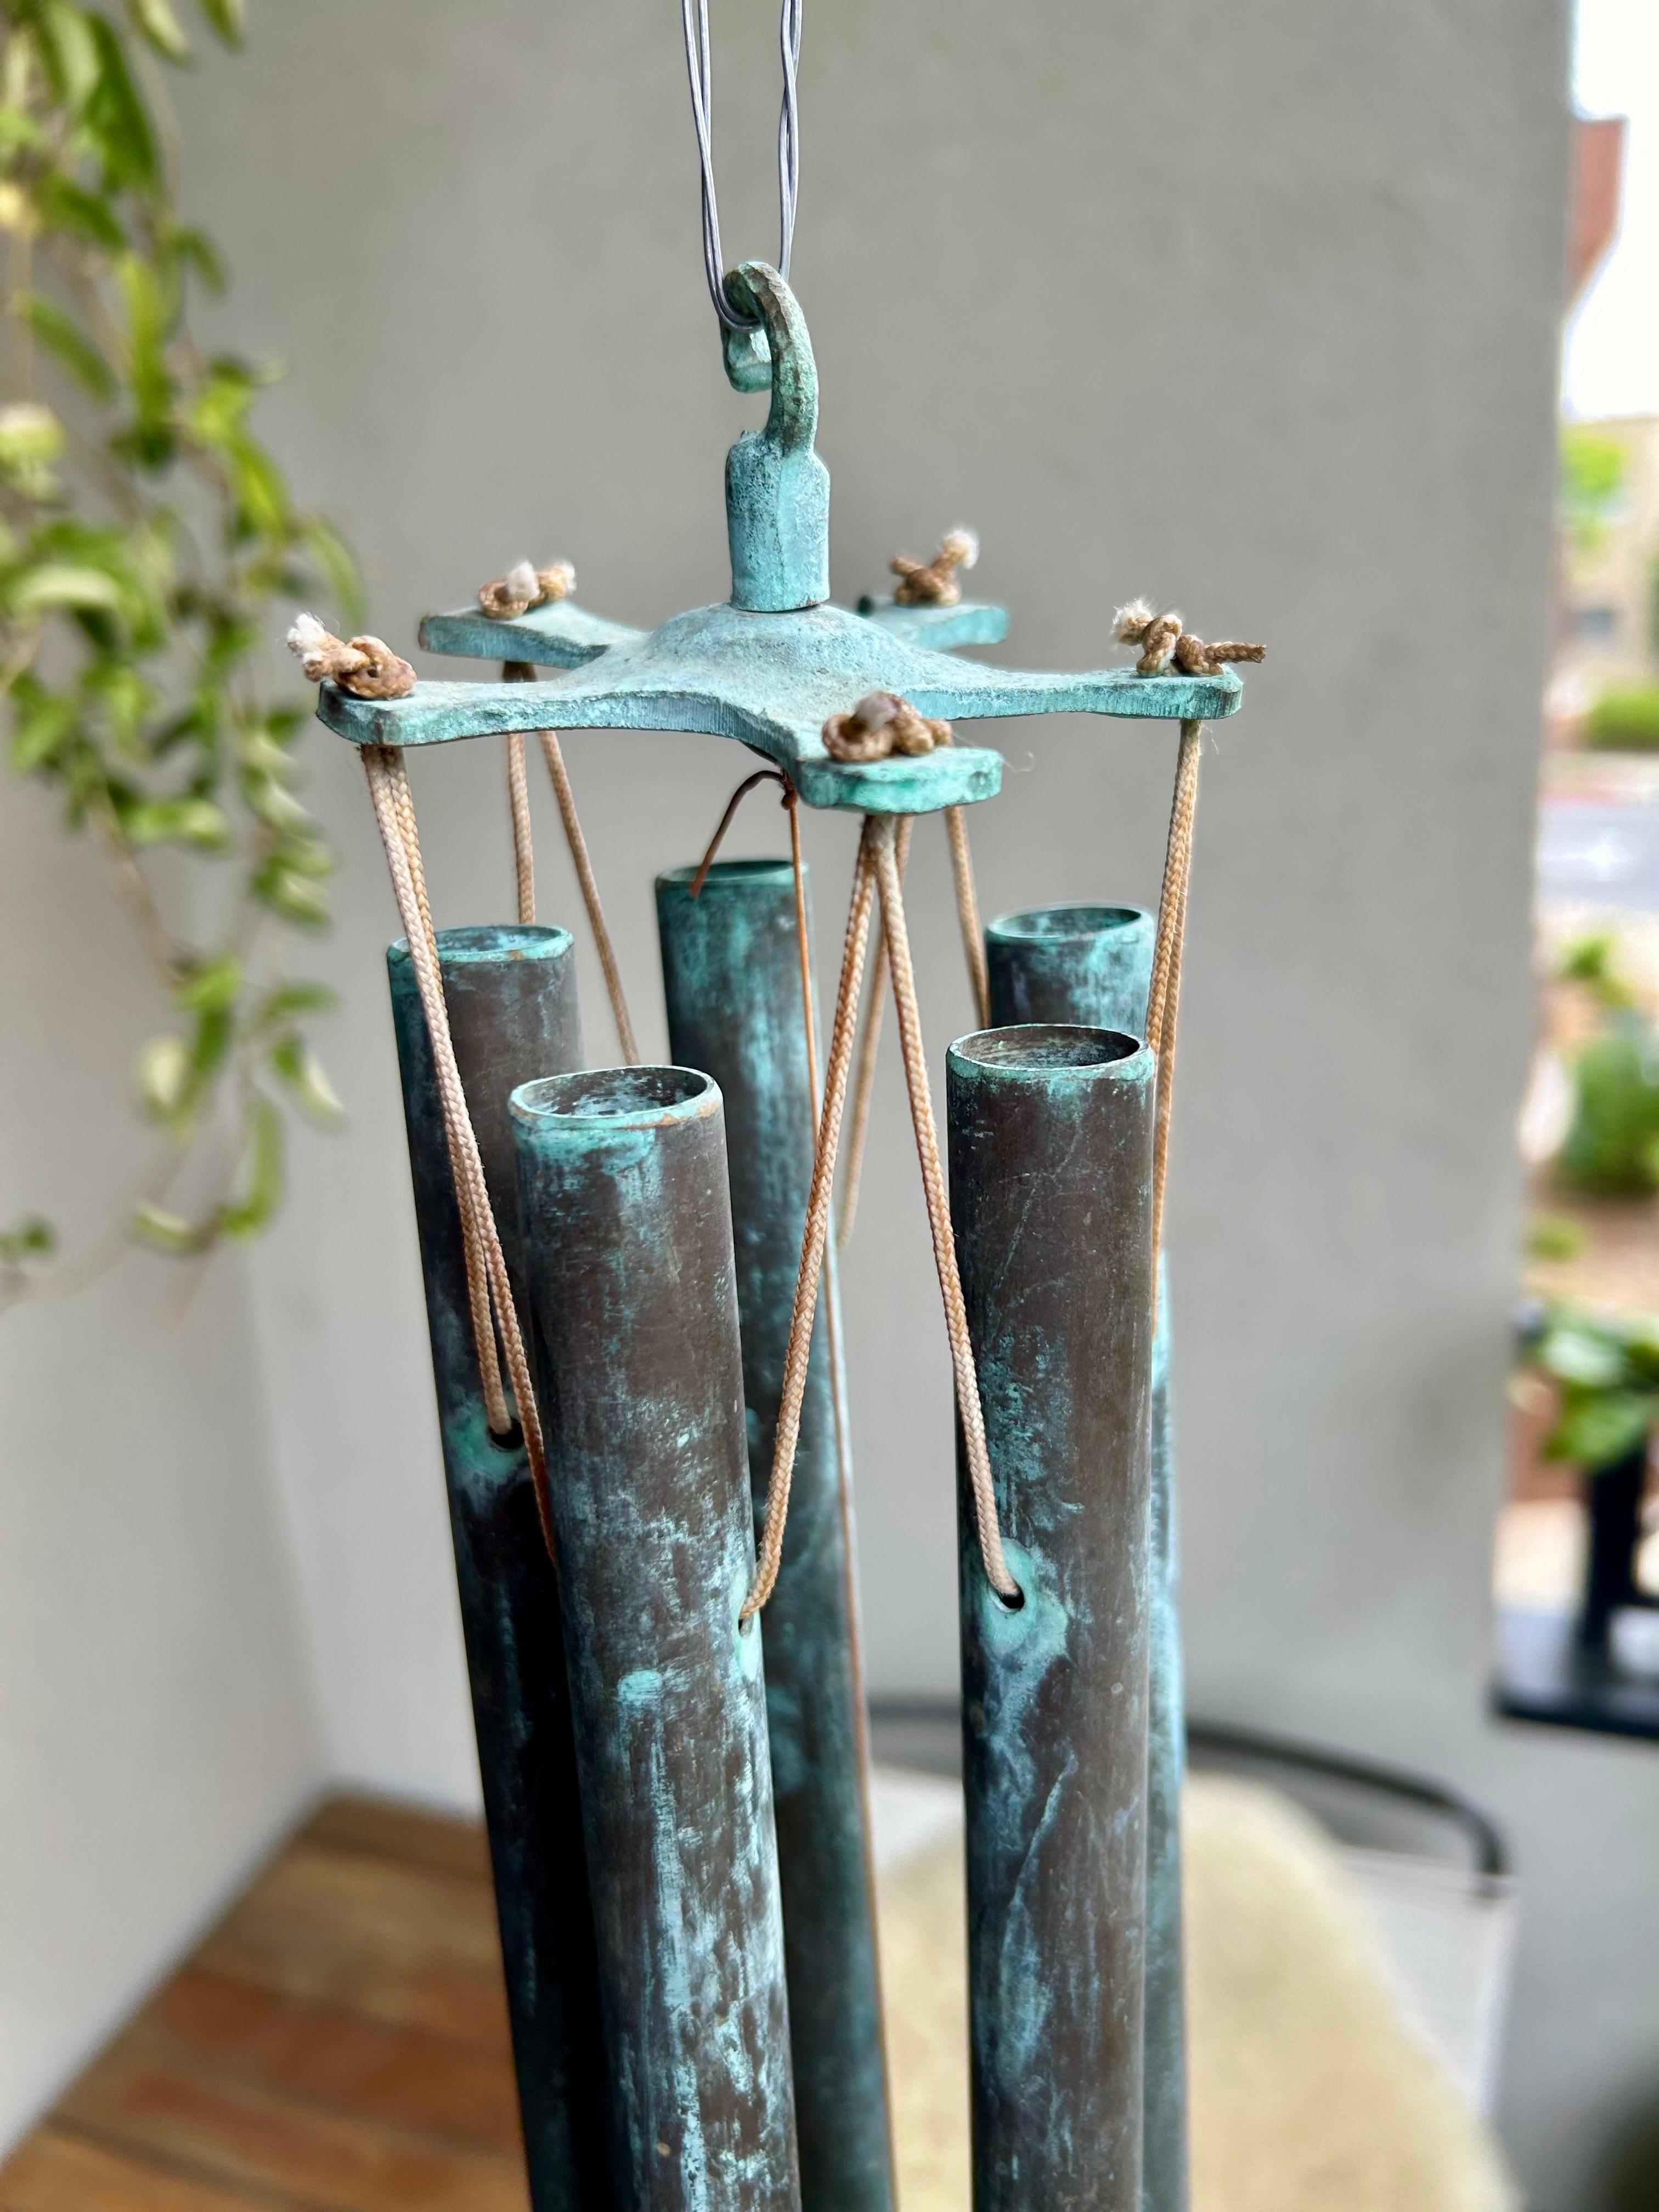 Nice wind bell with a wonderful verdigris patina.
Great musical sound.
Fine original vintage condition.
Great for any environment and collections...